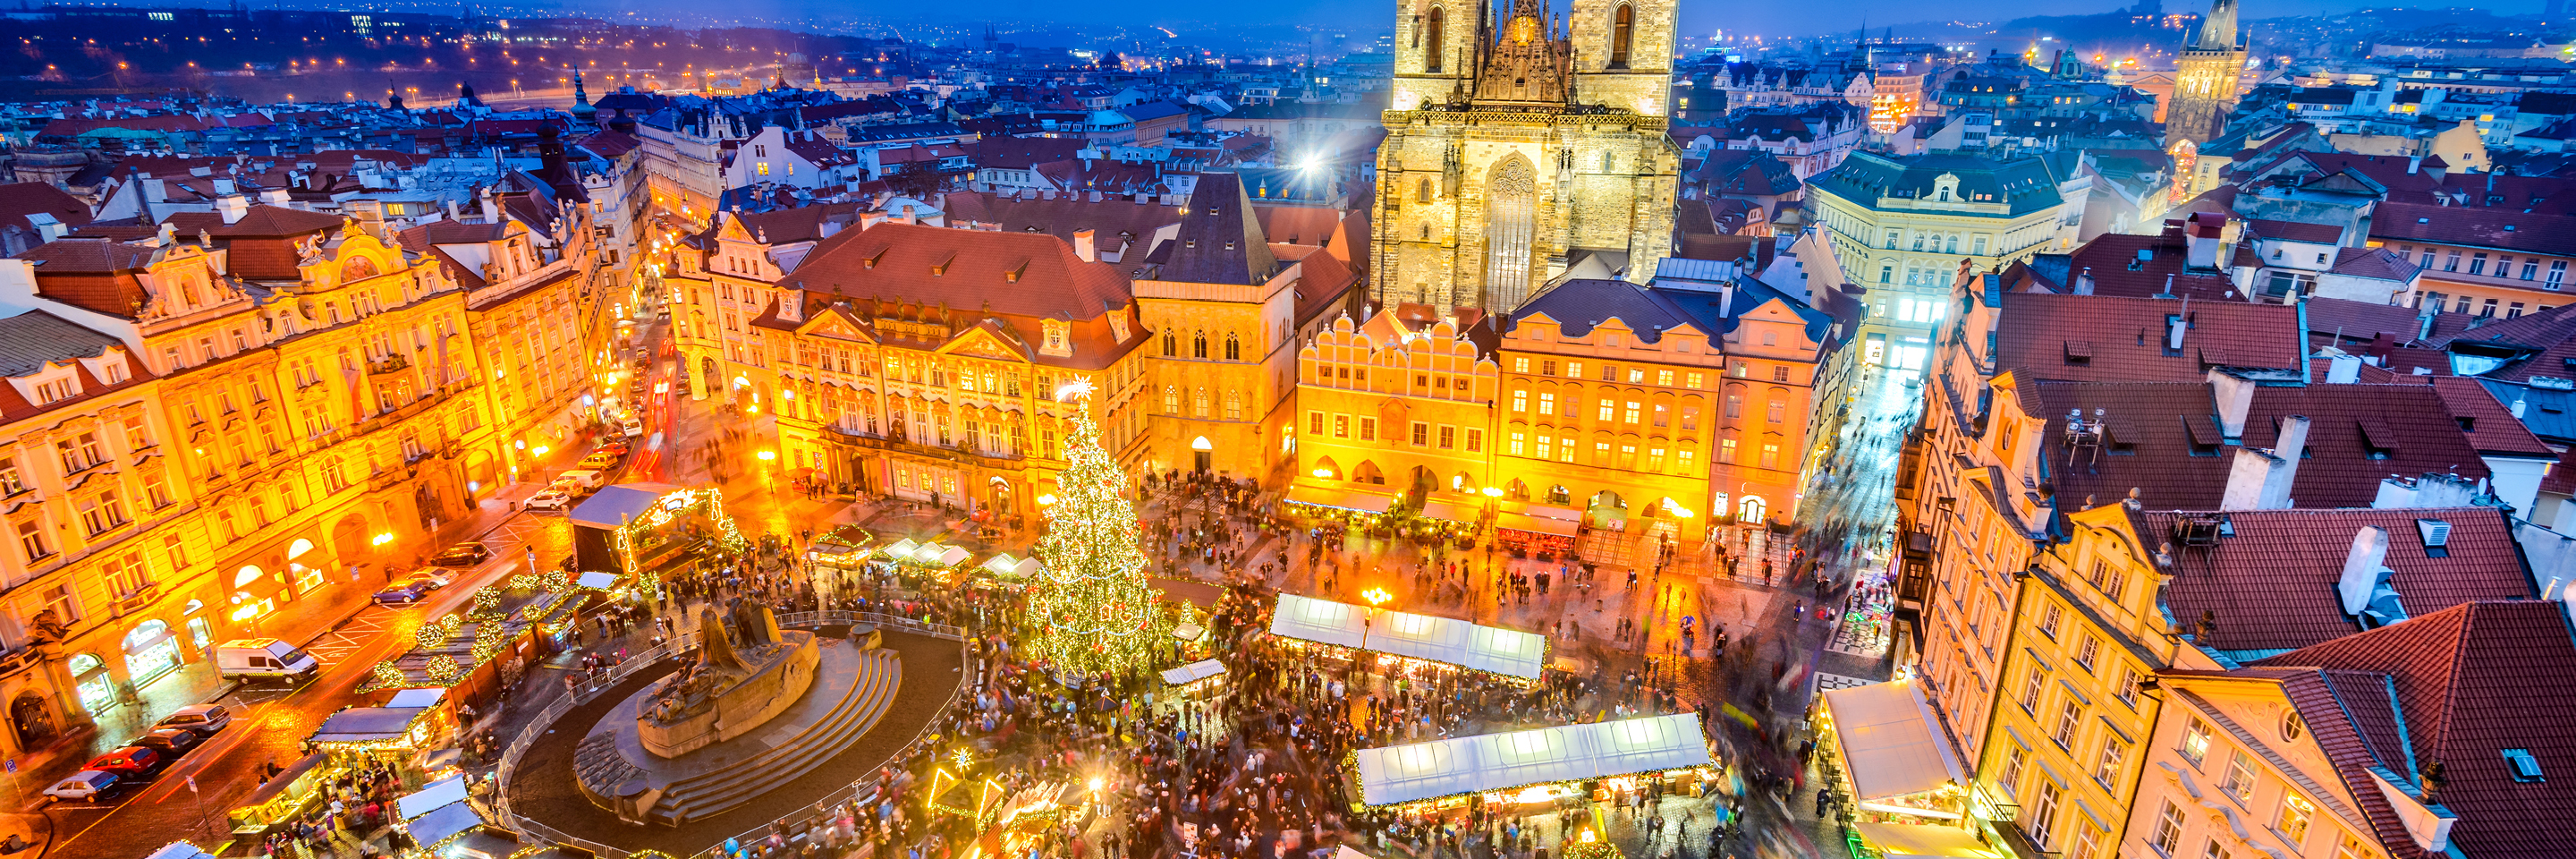 Christmastime from Basel to Nuremberg with 2 Nights in Prague